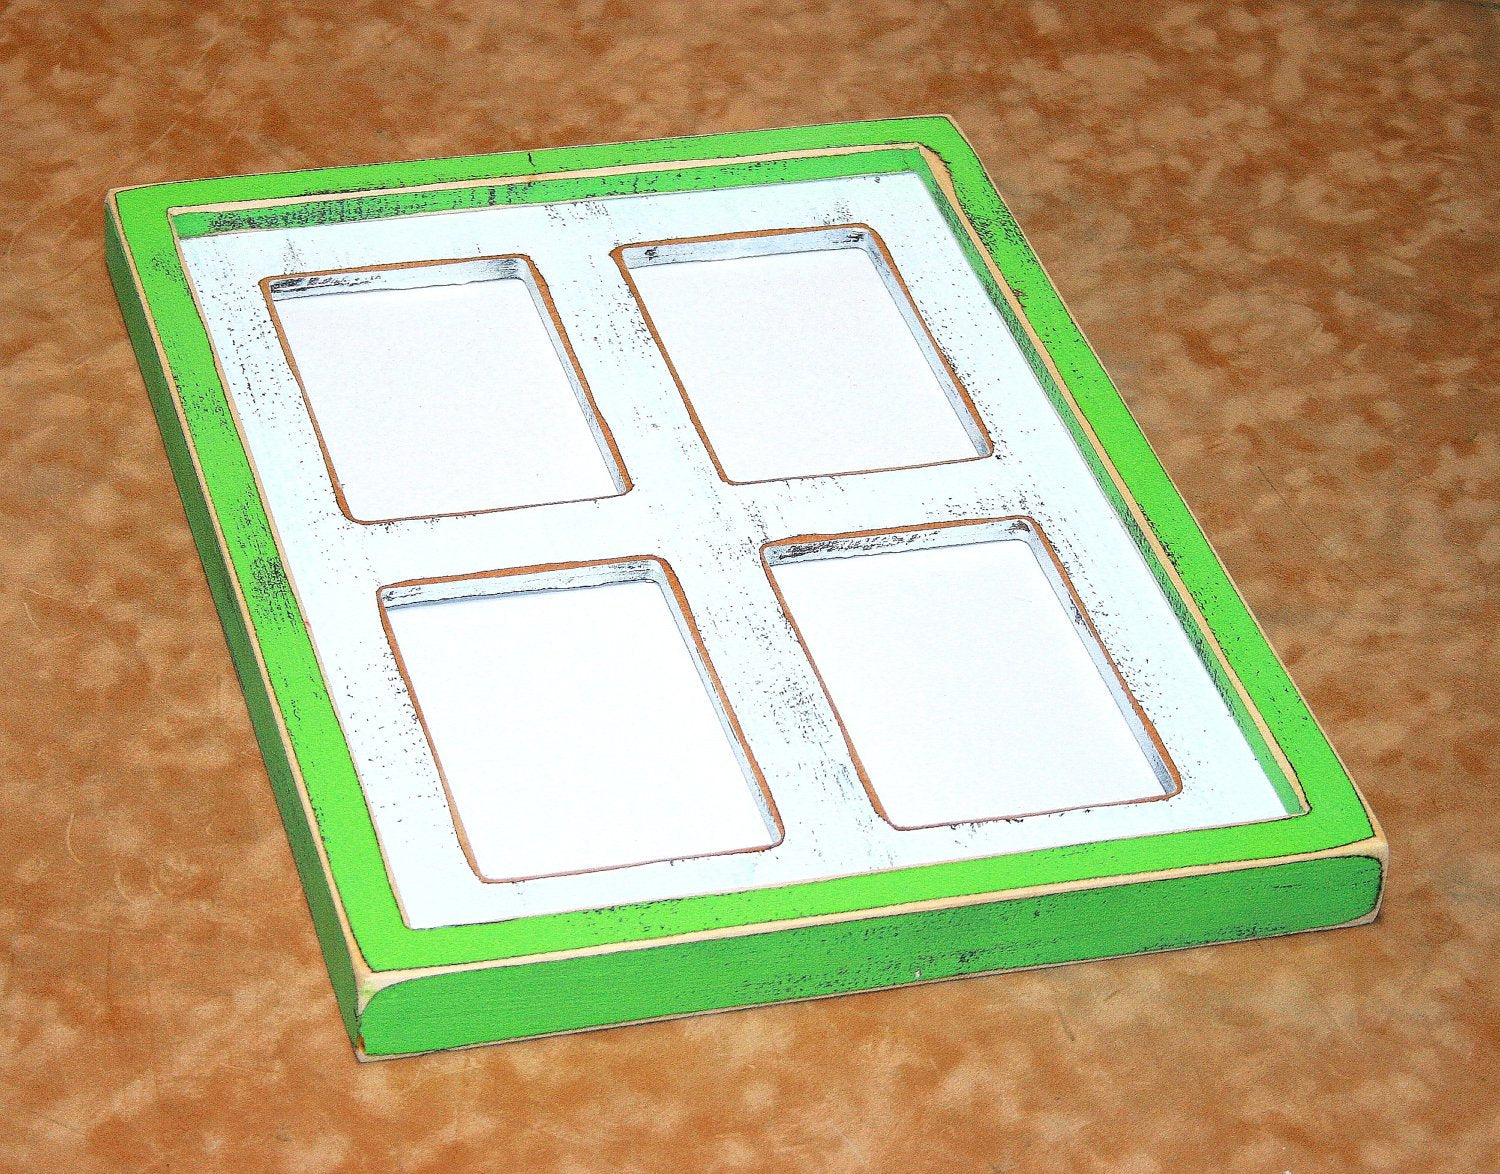 Multiple opening Picture frame 4 opening for 4x6, 4x4, 5x5 or 5x7's you choose the size/colors 